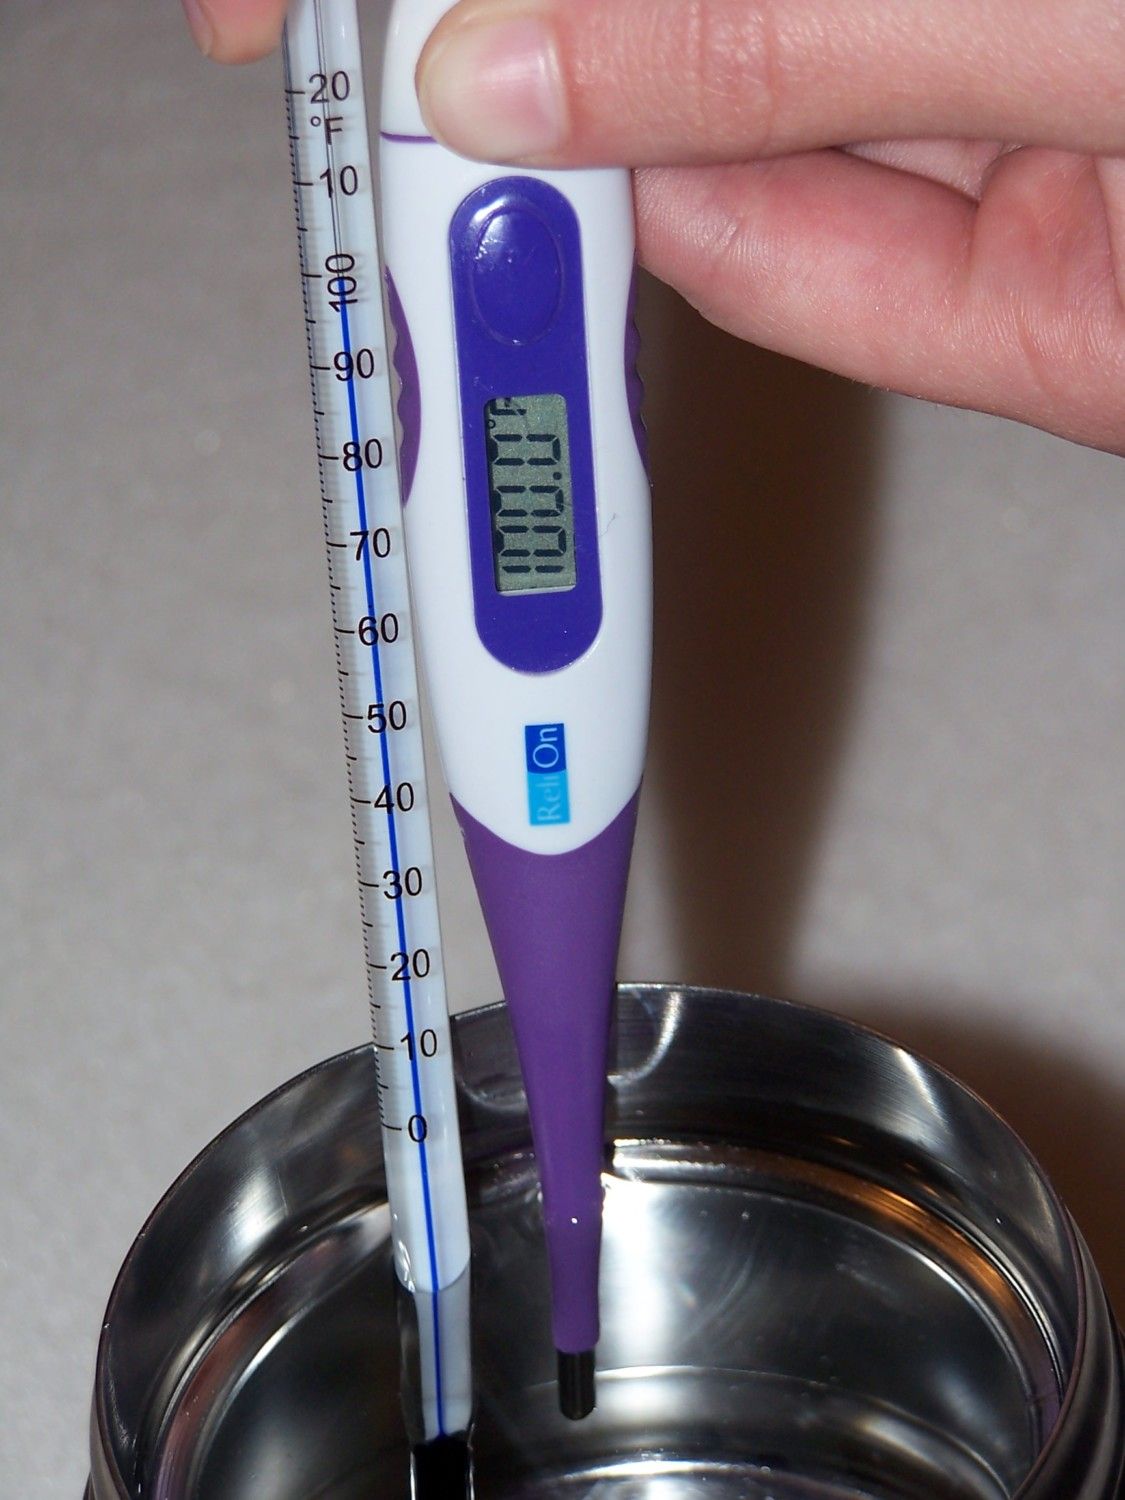 Hard time calibrating digital thermometer | BackYard Chickens - Learn How  to Raise Chickens